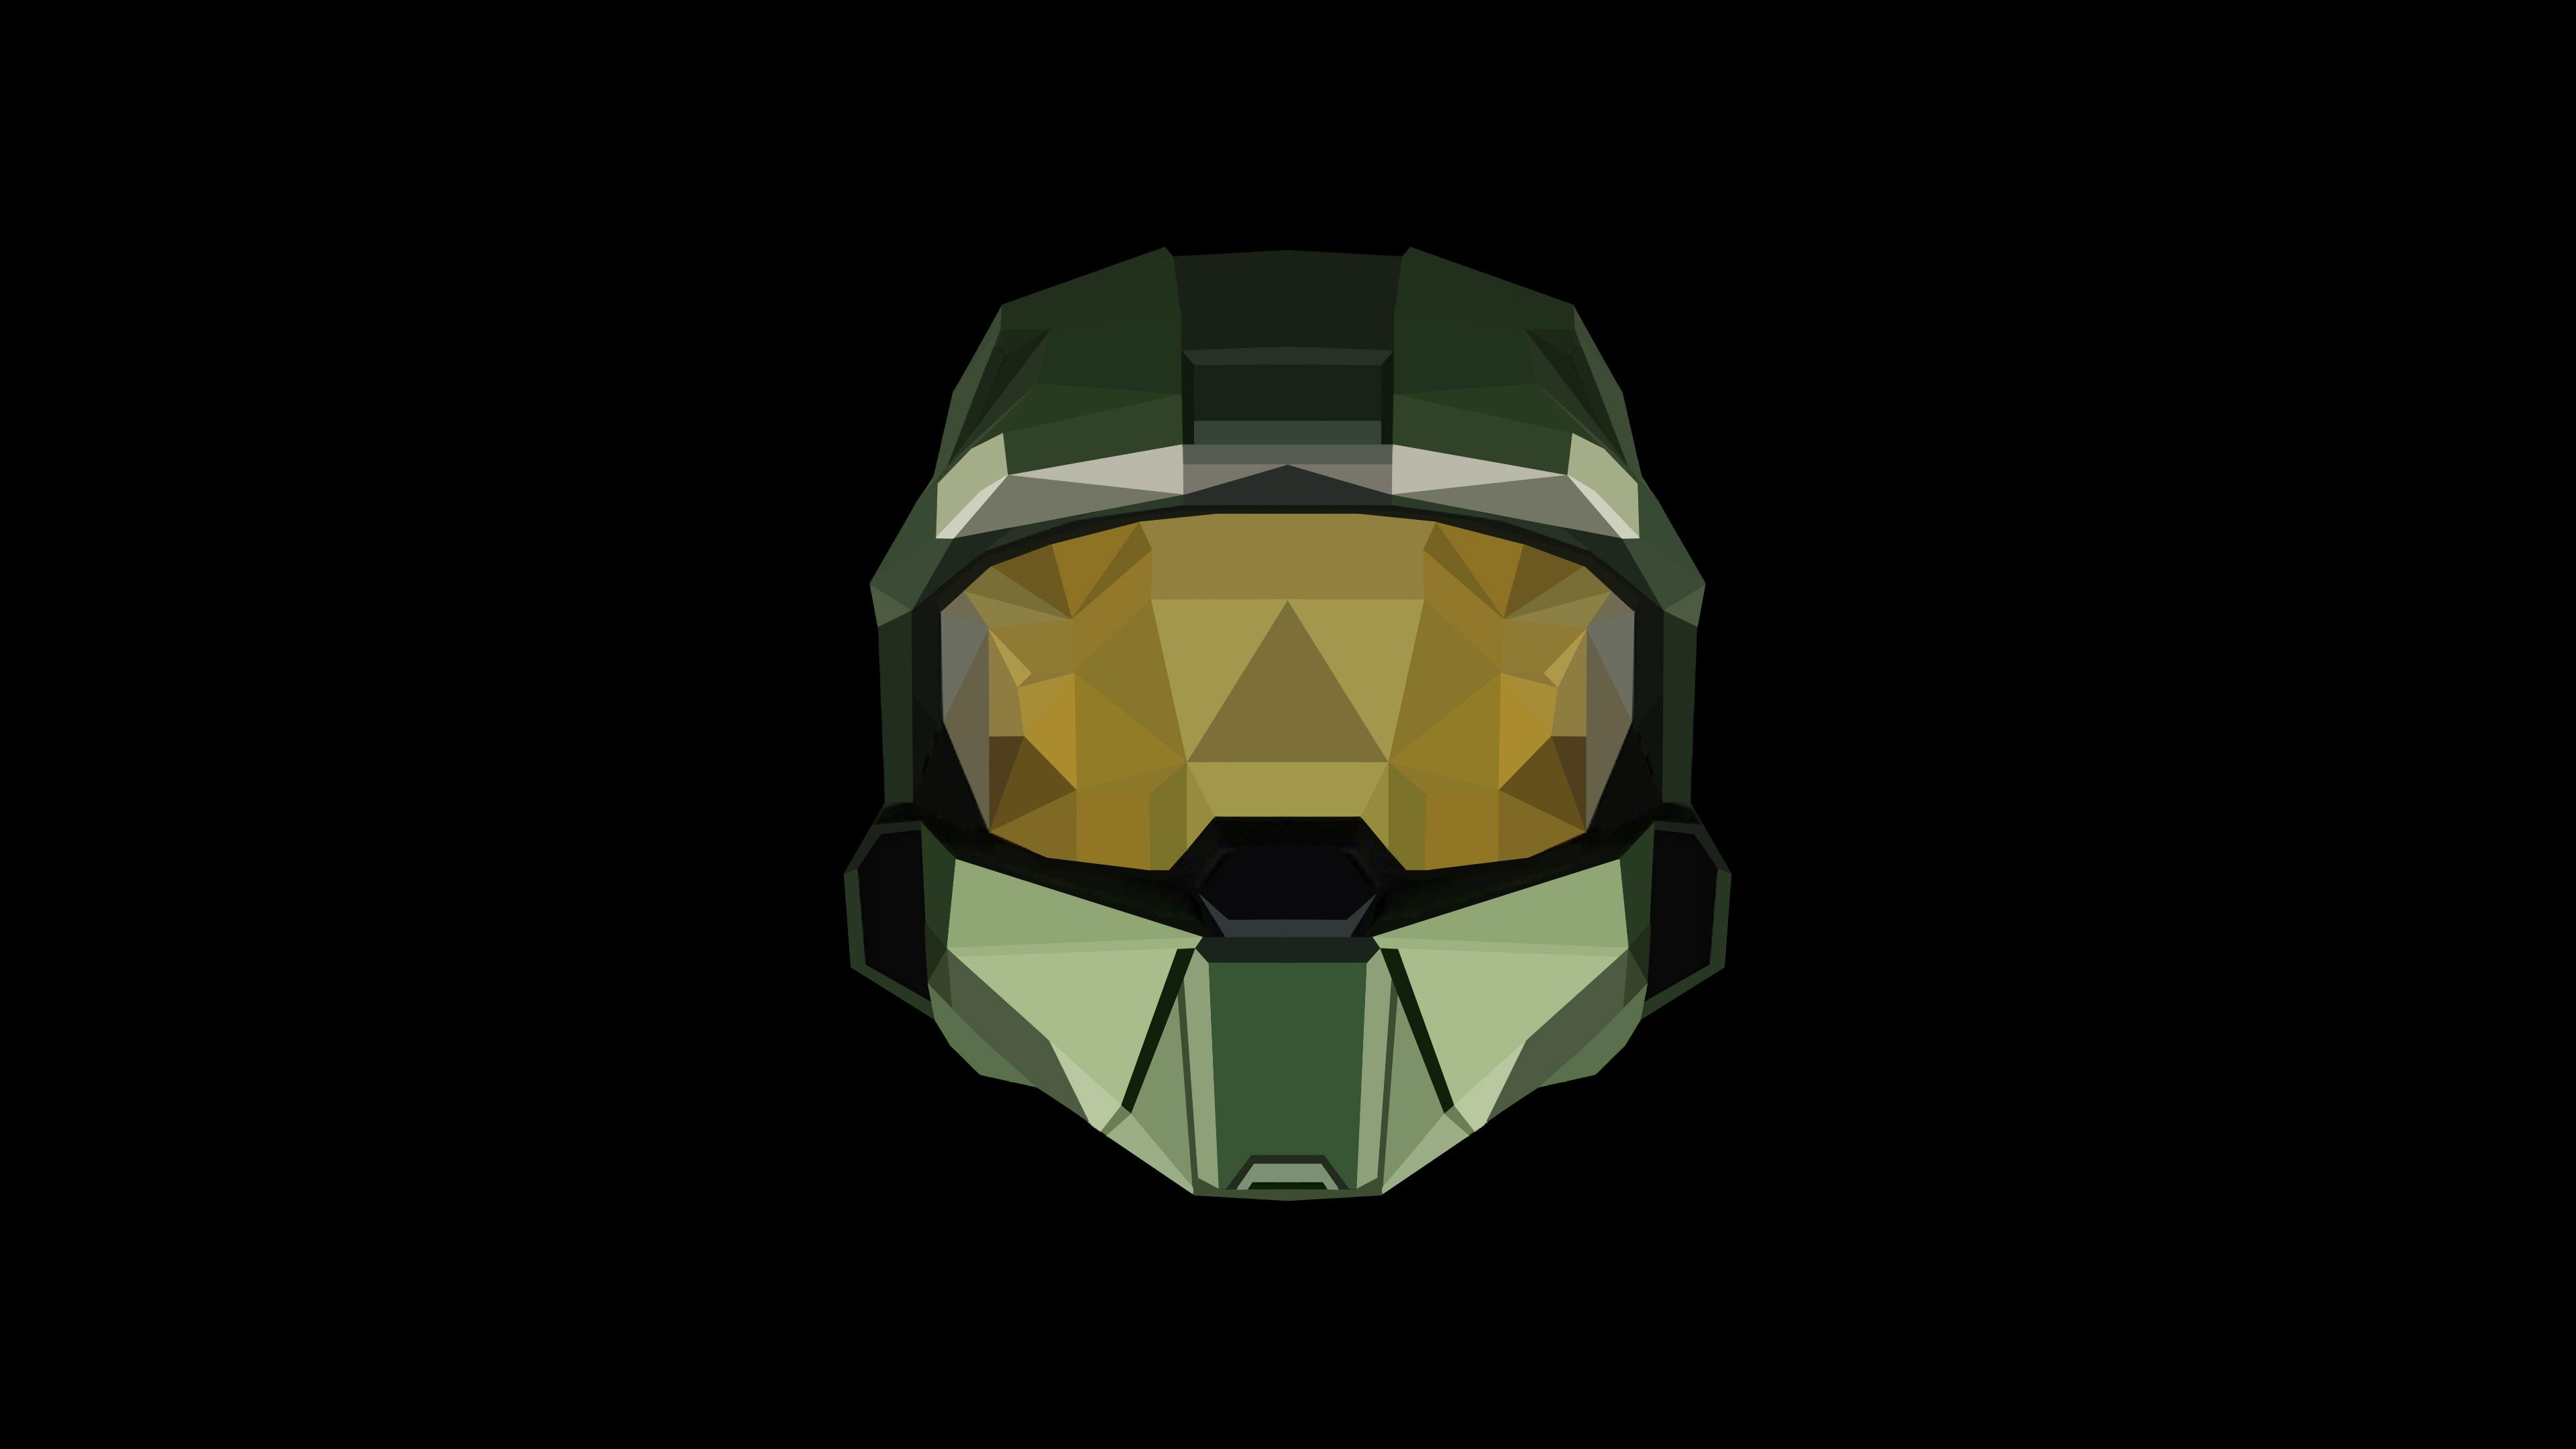 Just A Master Chief Wallpaper I Made In Photoshop Halo